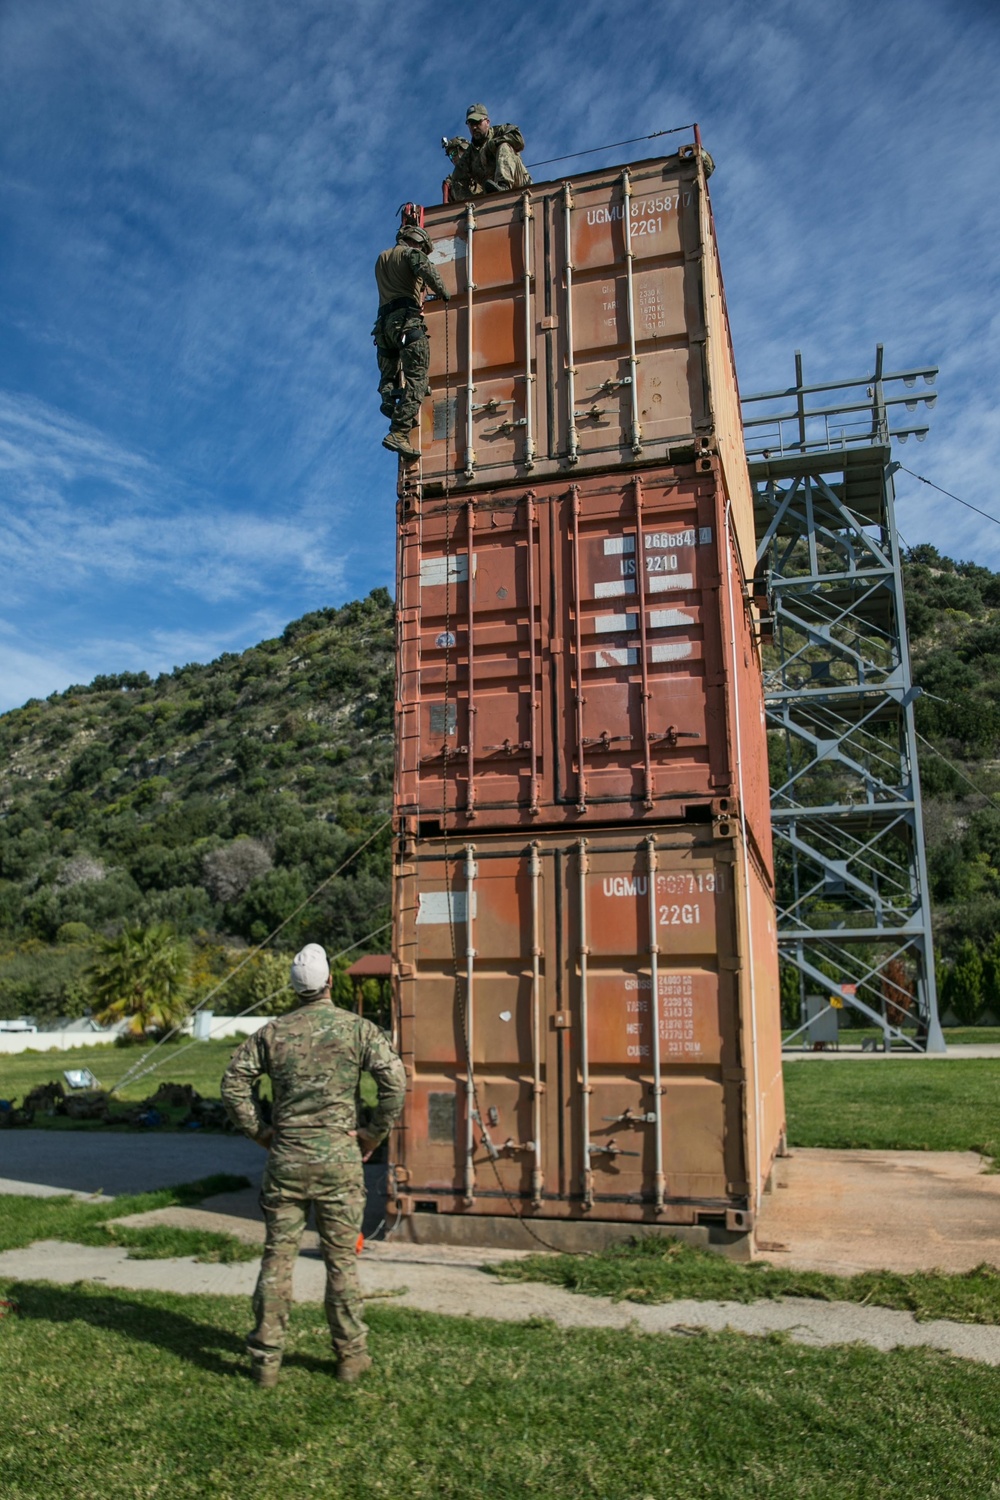 MRF, 26th MEU conduct fast rope and container inspection training at NMIOTC, Souda Bay, Greece